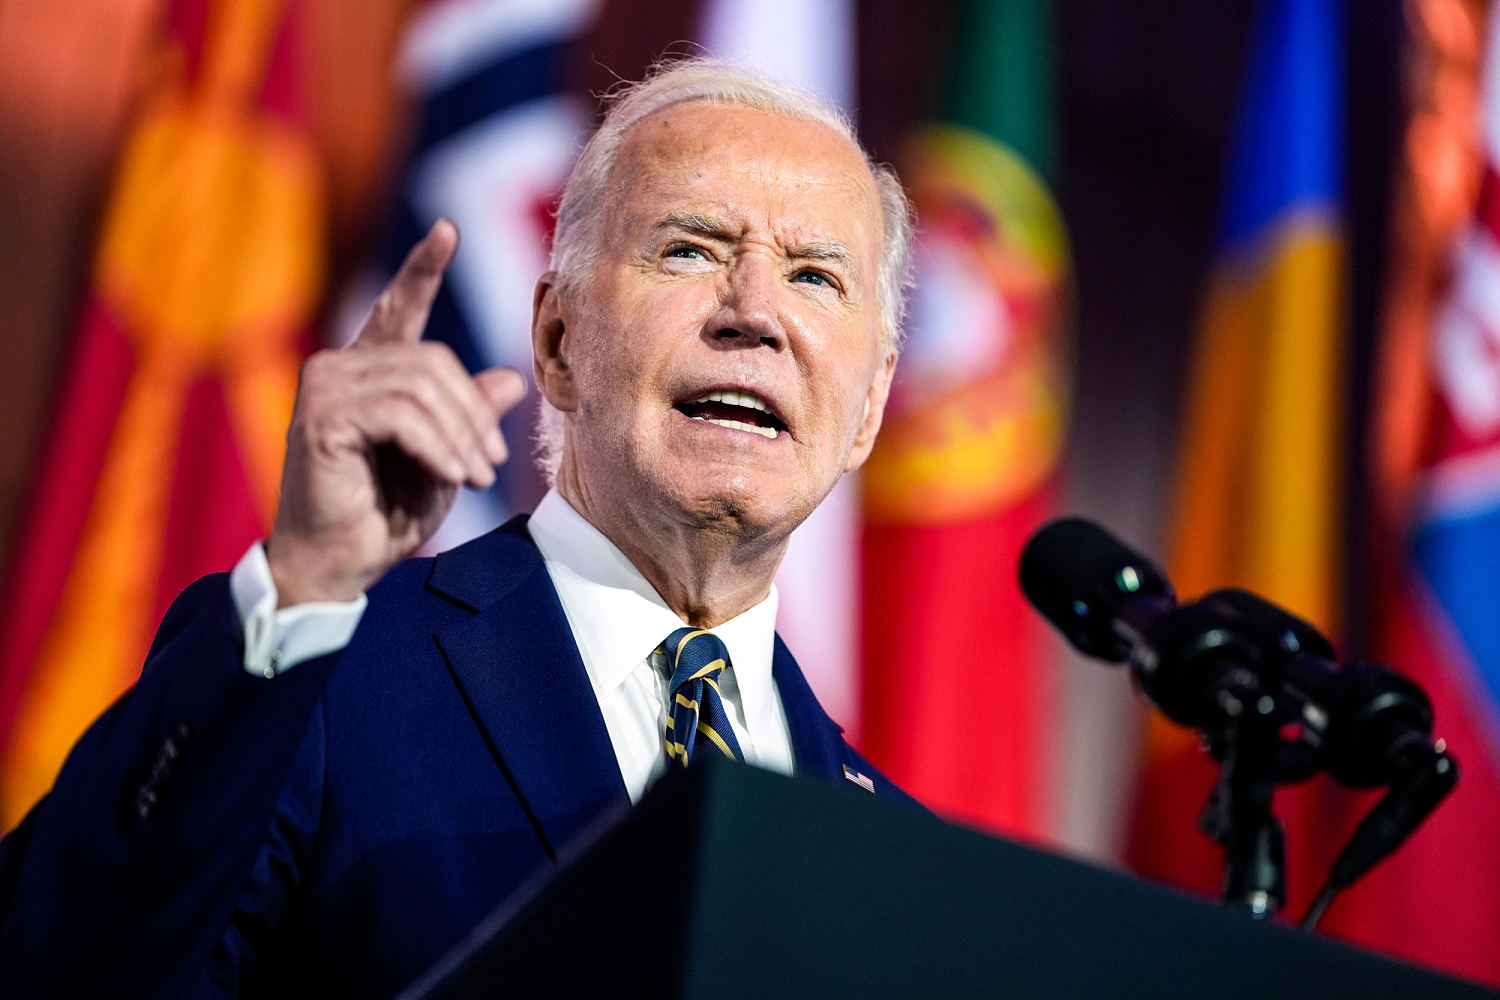 Biden to hold first news conference since Trump debate